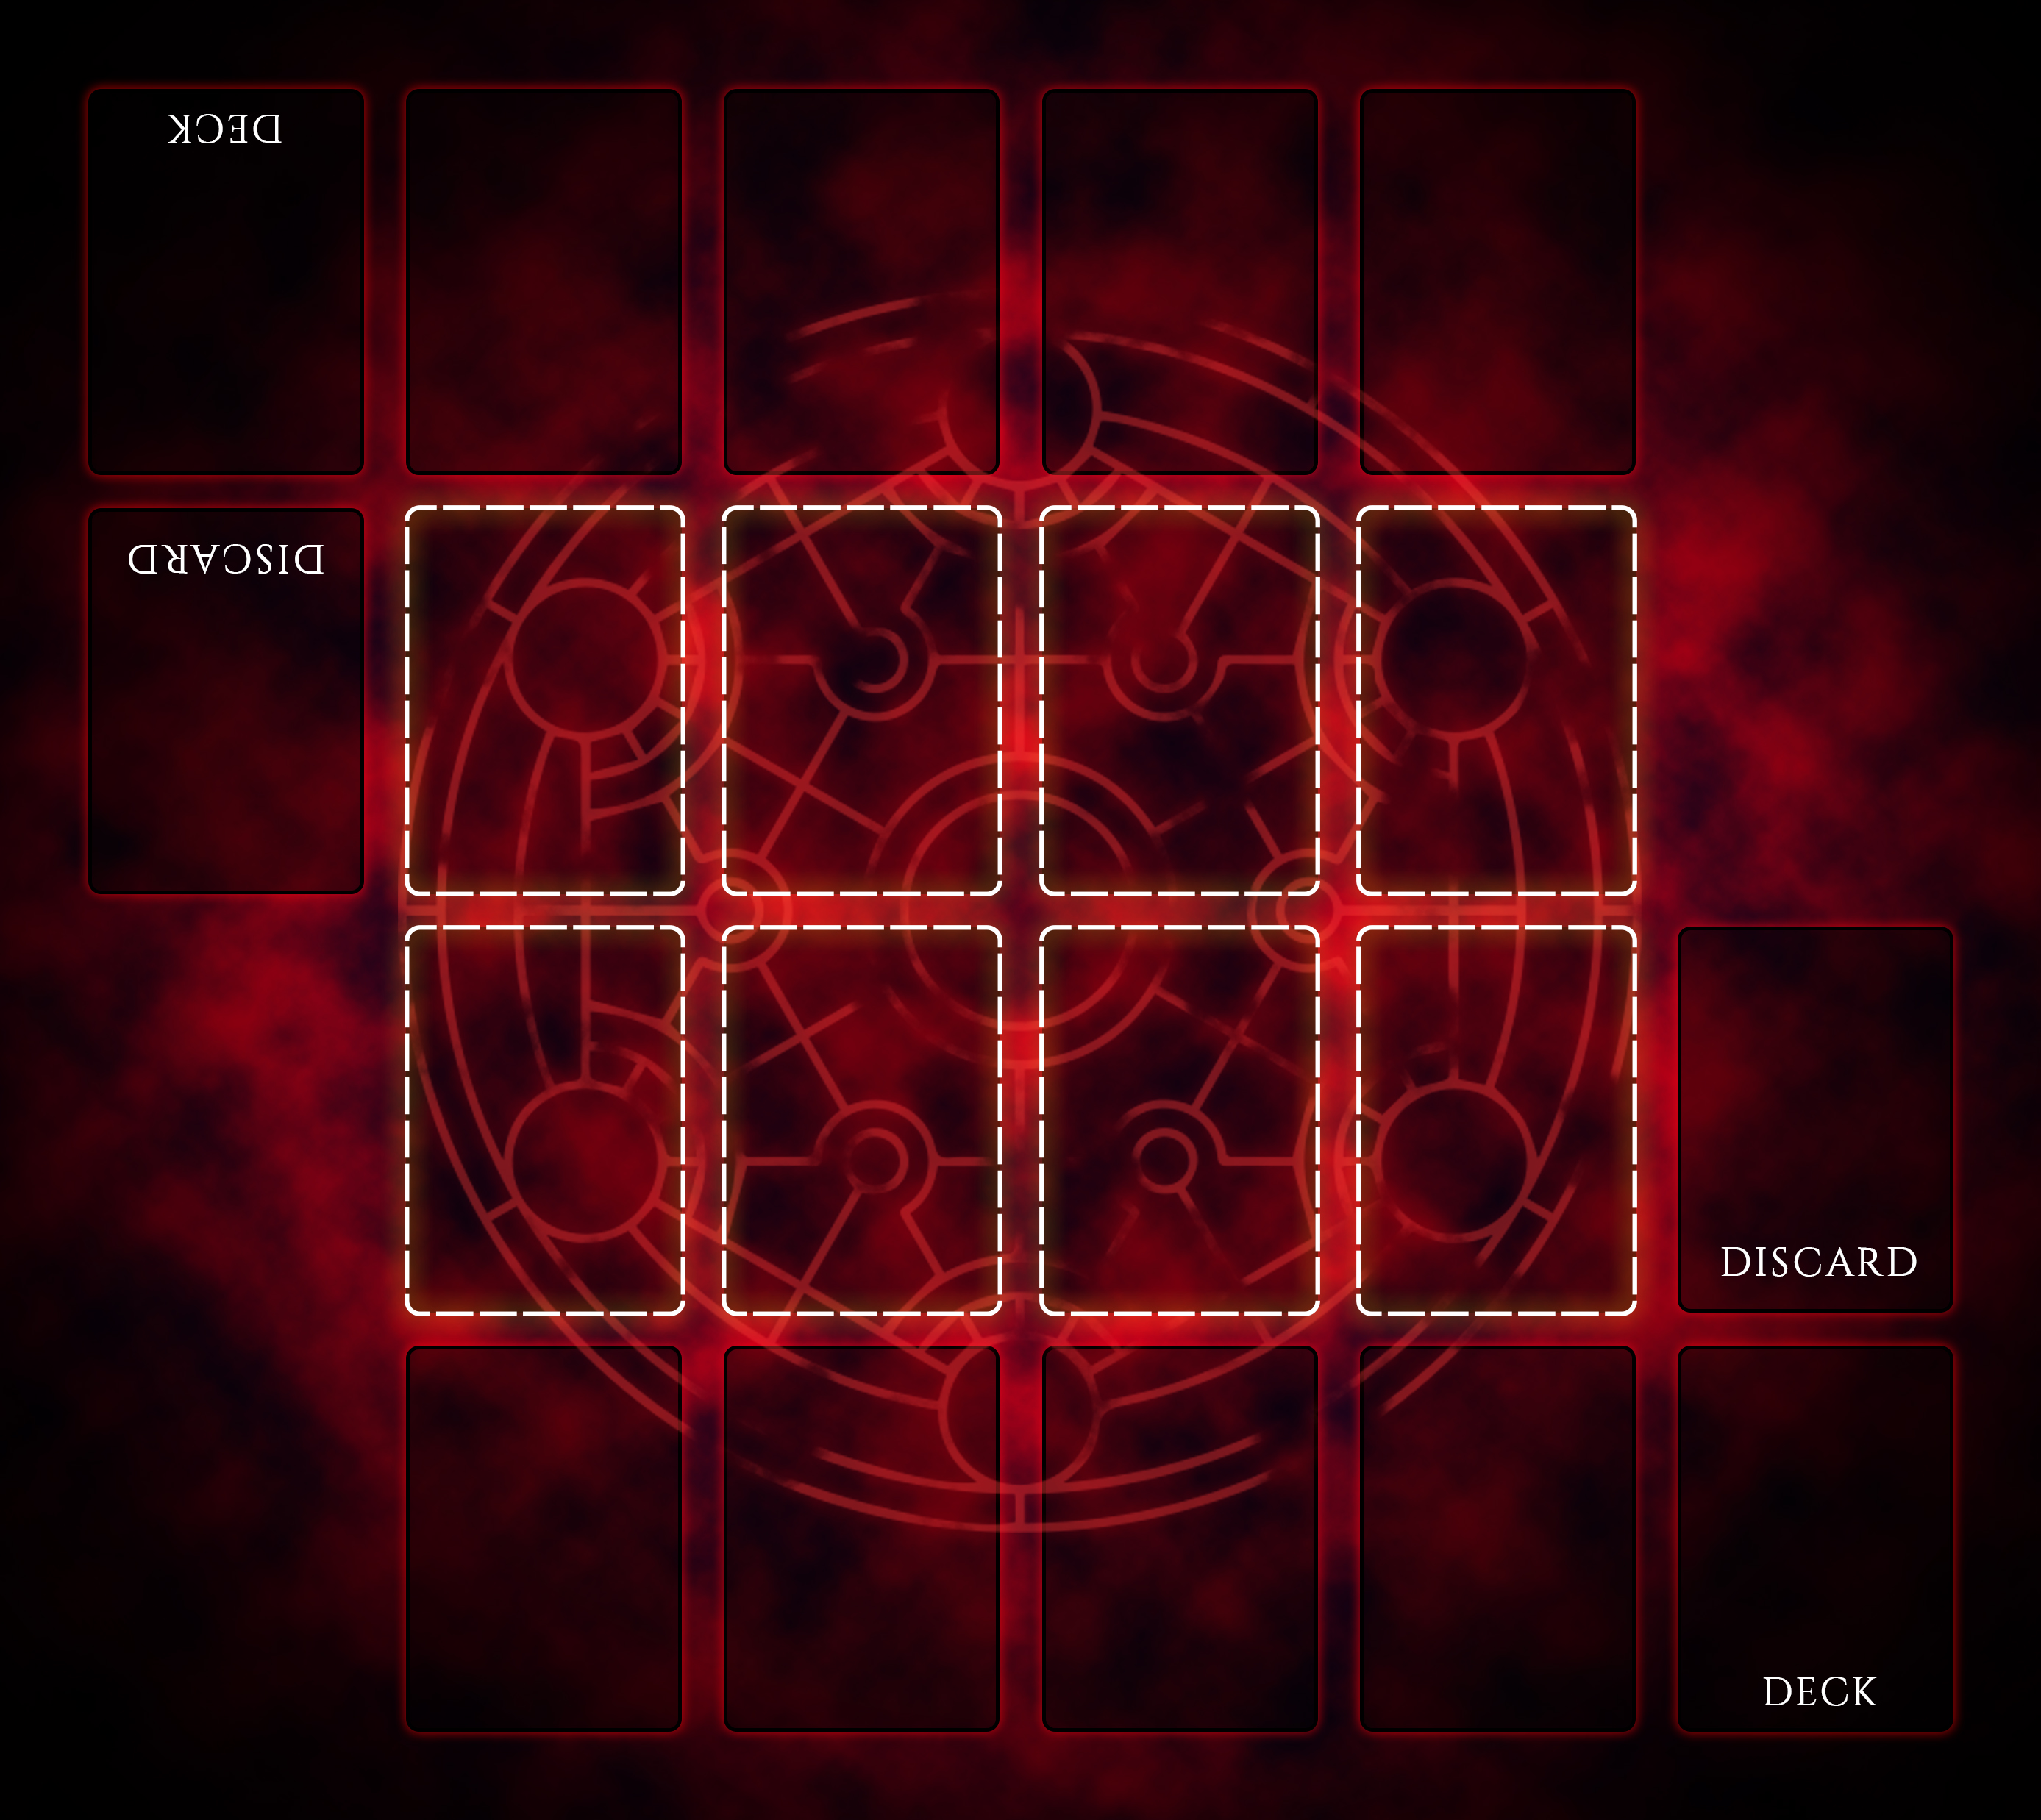 The Heartbreaker playmat. The top and bottom rows house the “hearts” which each player is trying to destroy. Destroy all your opponent’s hearts, and they’re out of the game.